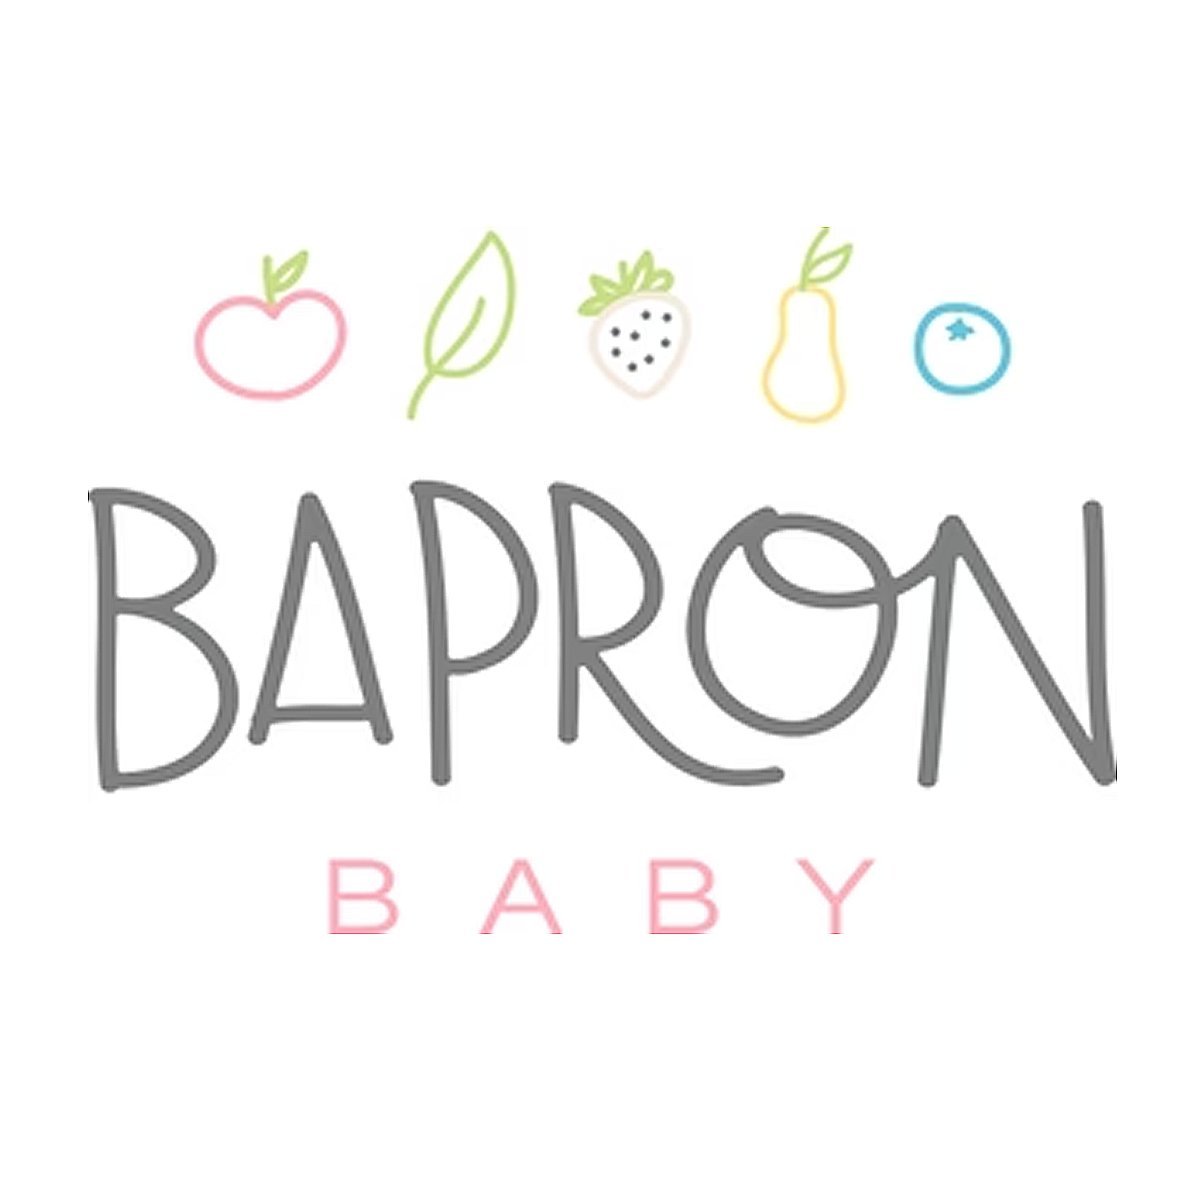 BapronBaby - Hip Mommies Baby & Toddler Goods